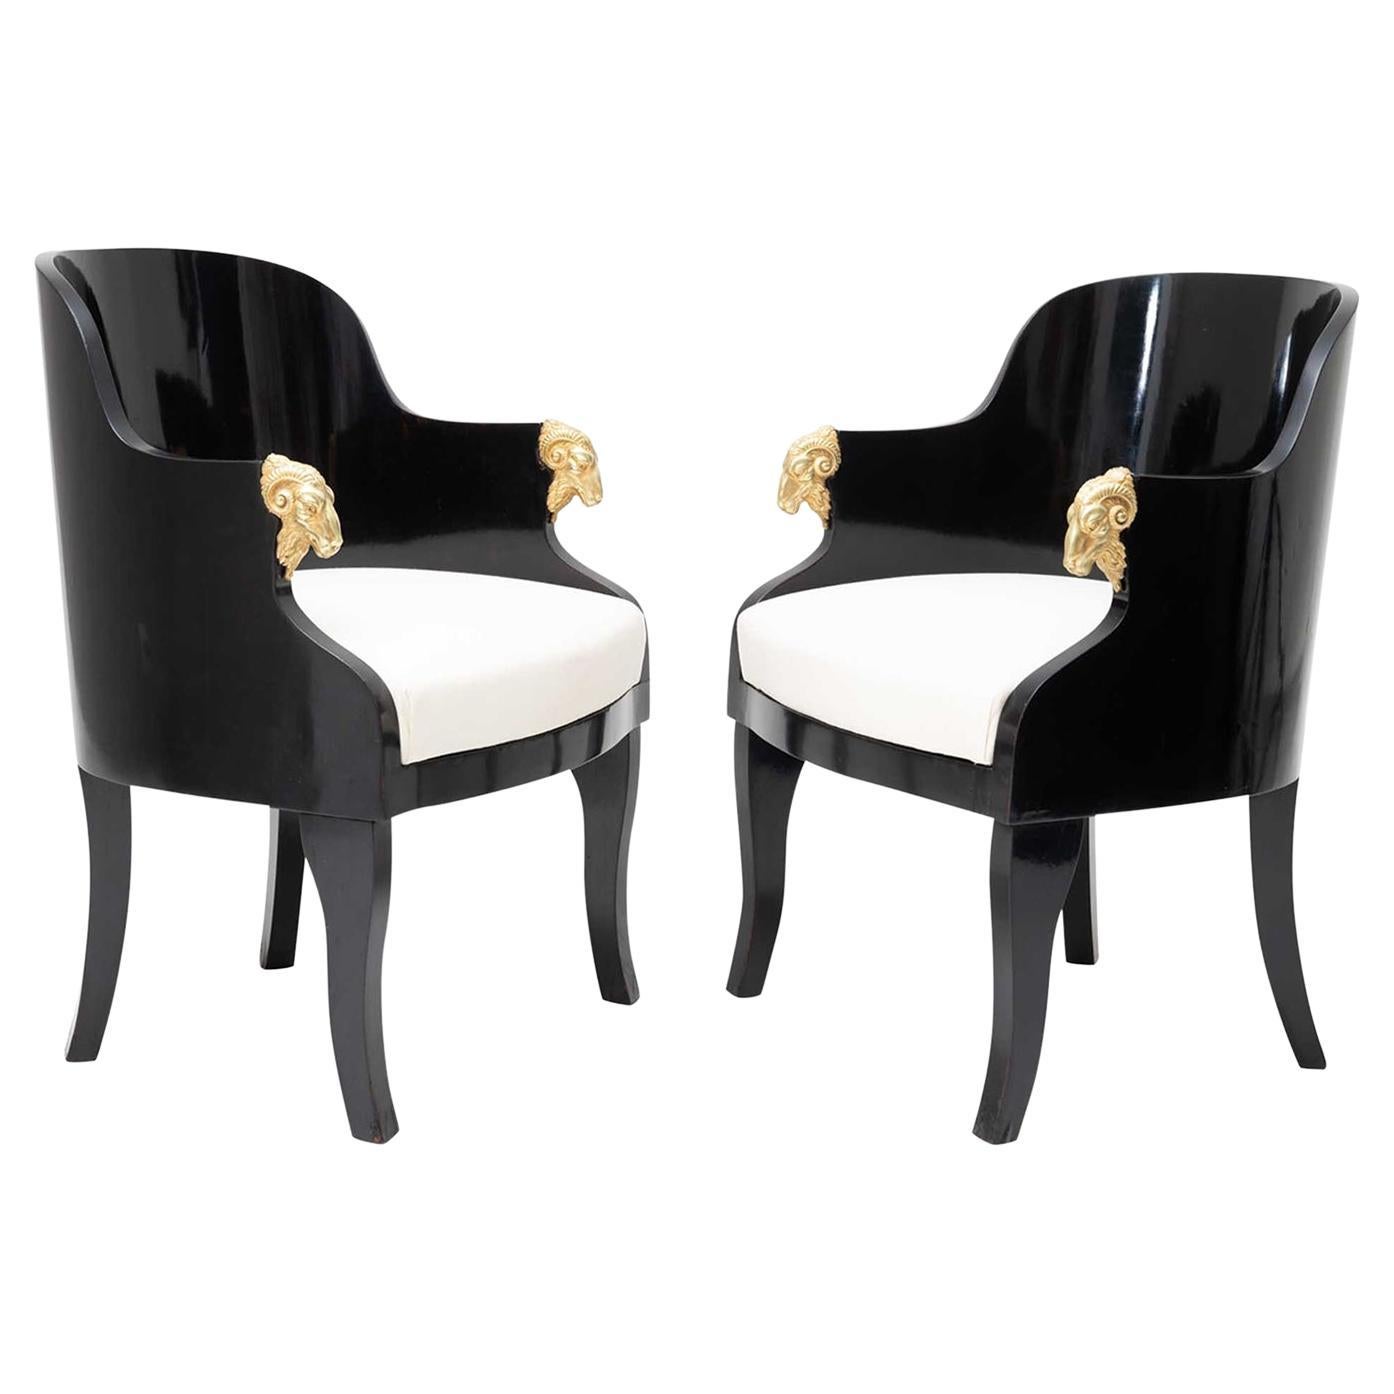 19th Century Black Baltic Pair of Lacquered Birch Armchairs, Antique Side Chairs